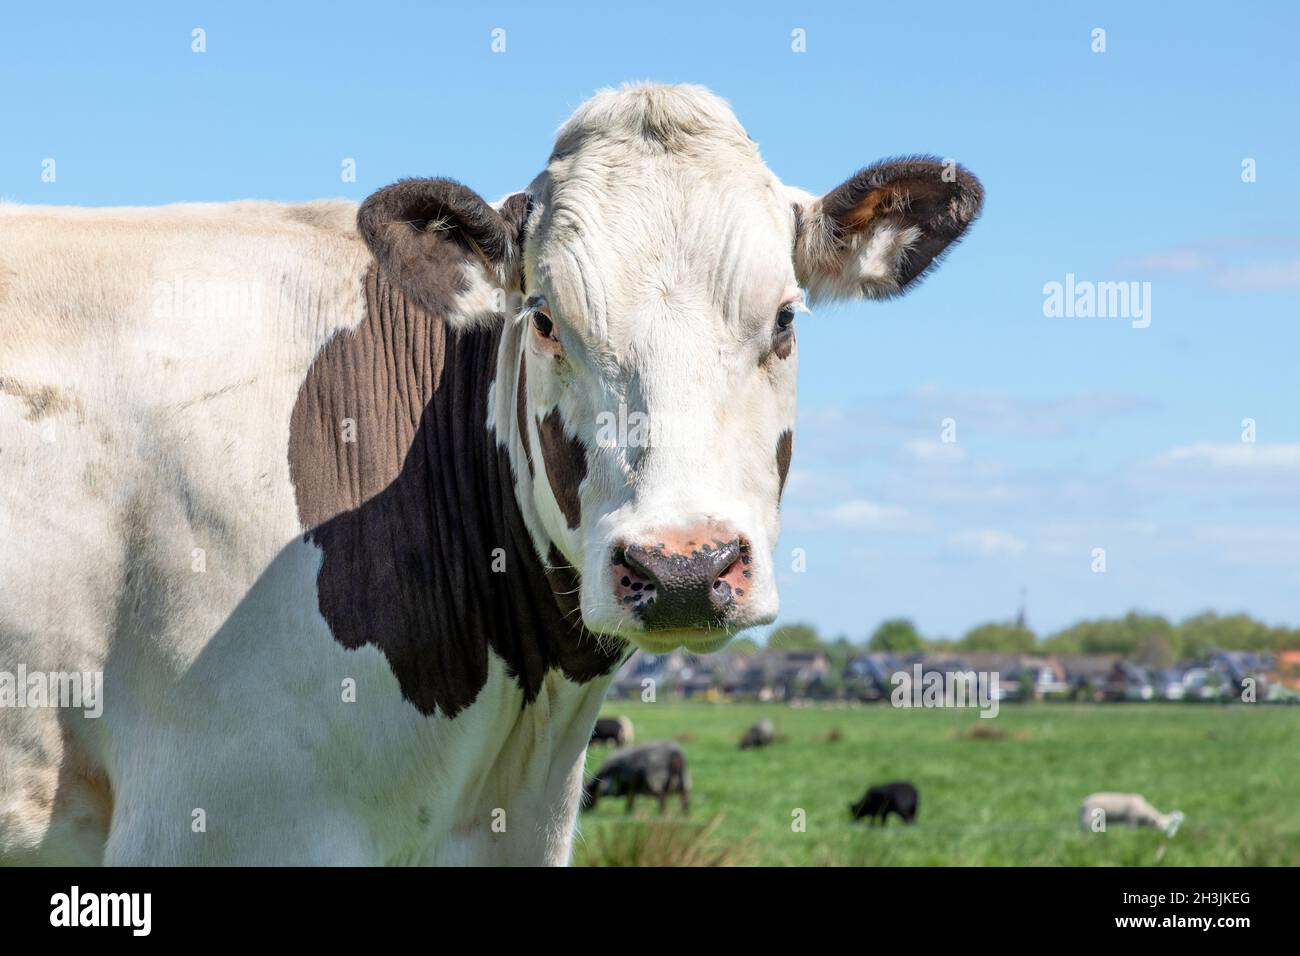 Cow portrait of a calm white and brown bovine, with pink nose and friendly and calm expression, a field and sky background Stock Photo